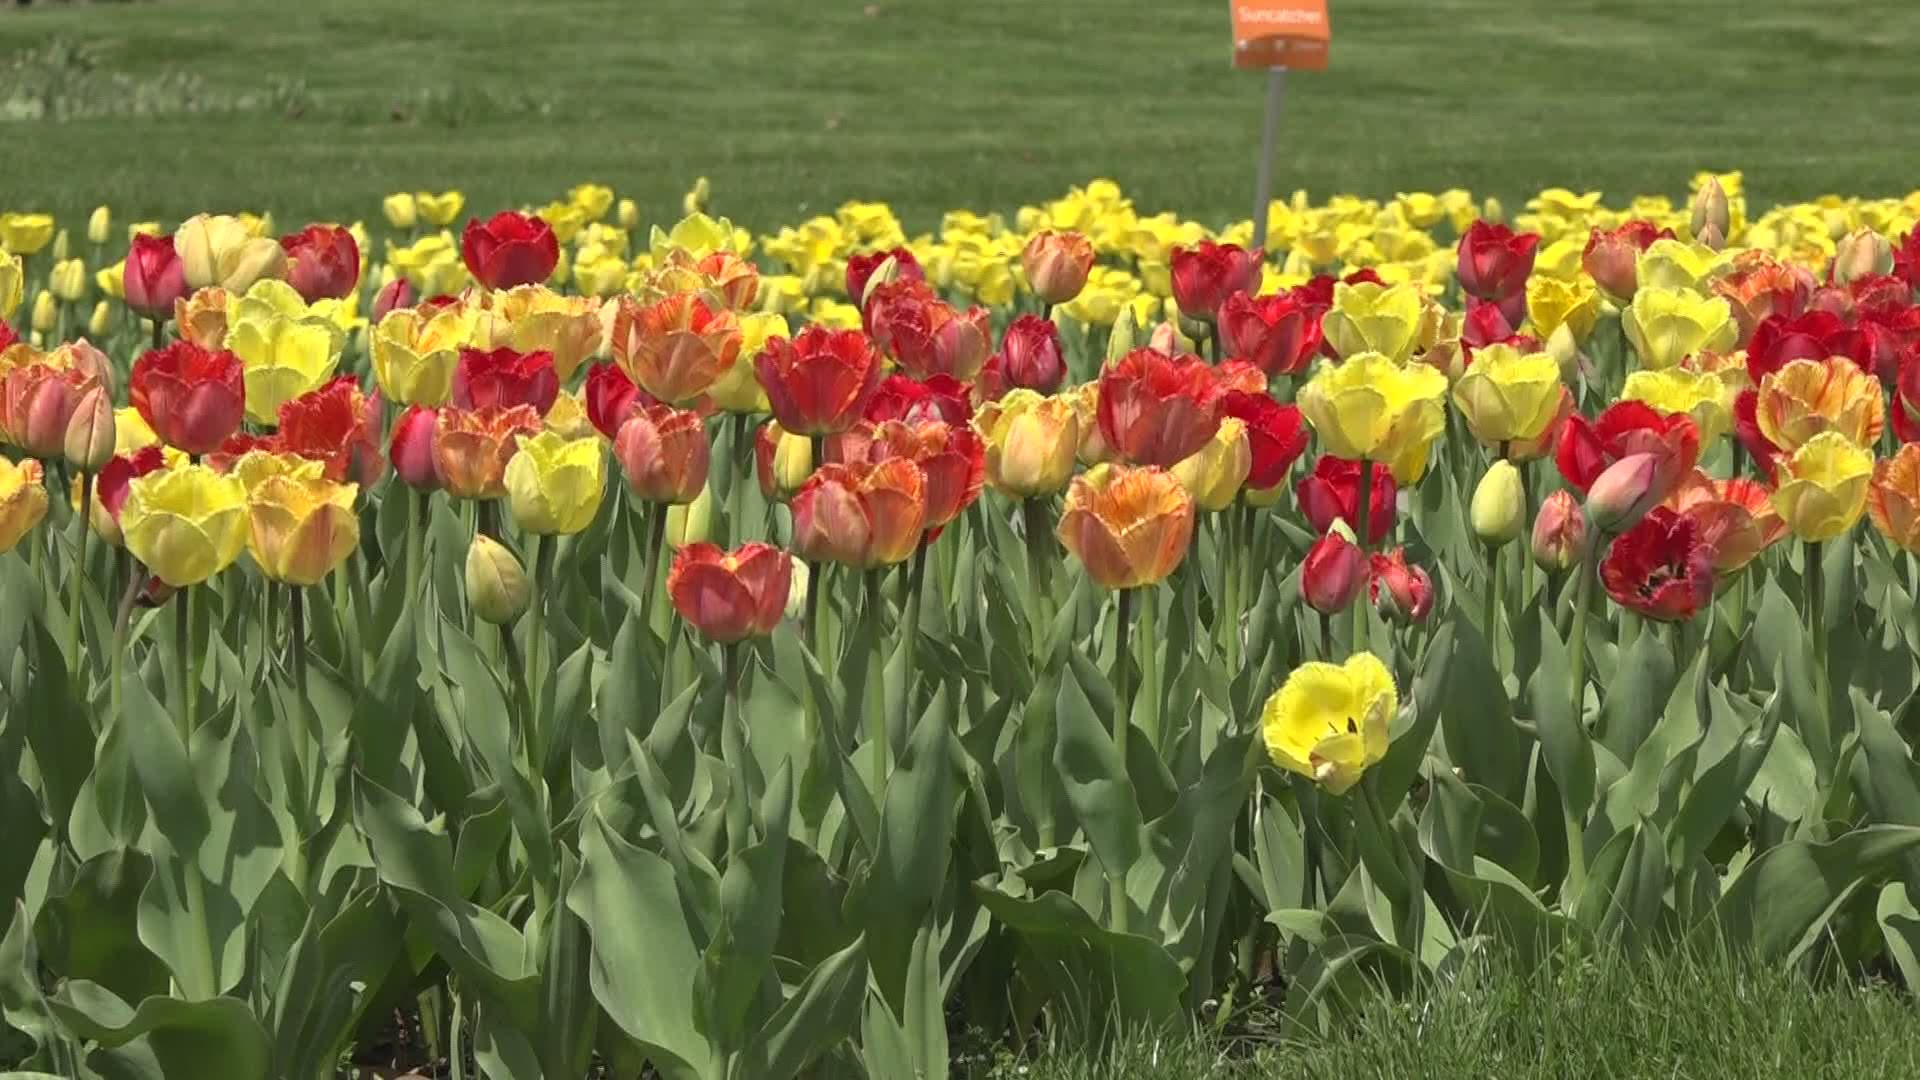 The Tulip Time Festival, alongside the City of Holland Parks Department, will be hosting the annual Community Planting Day next month.